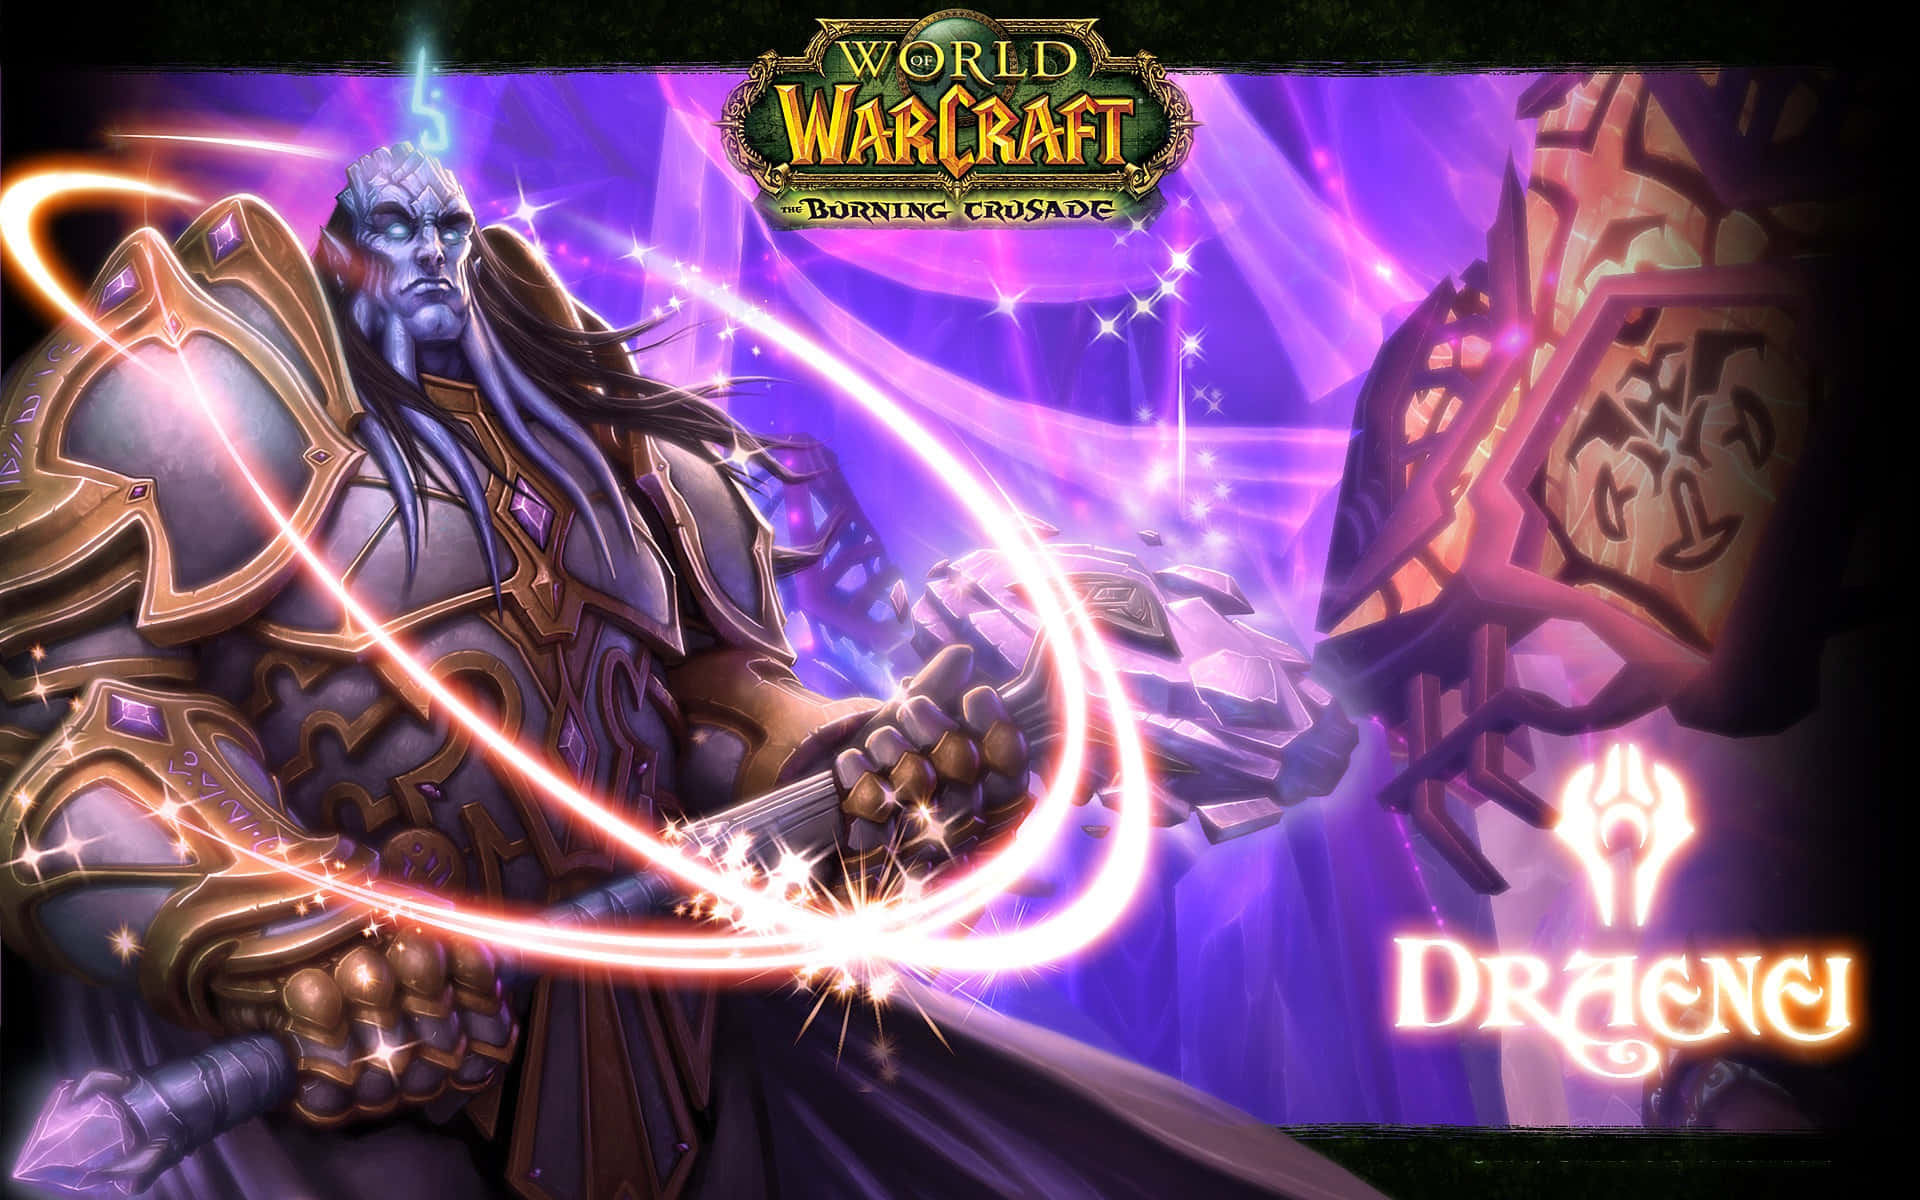 Adept Heroes Battling The Monstrous Illidan Stormrage In The Burning Crusade Expansion Of World Of Warcraft. Wallpaper